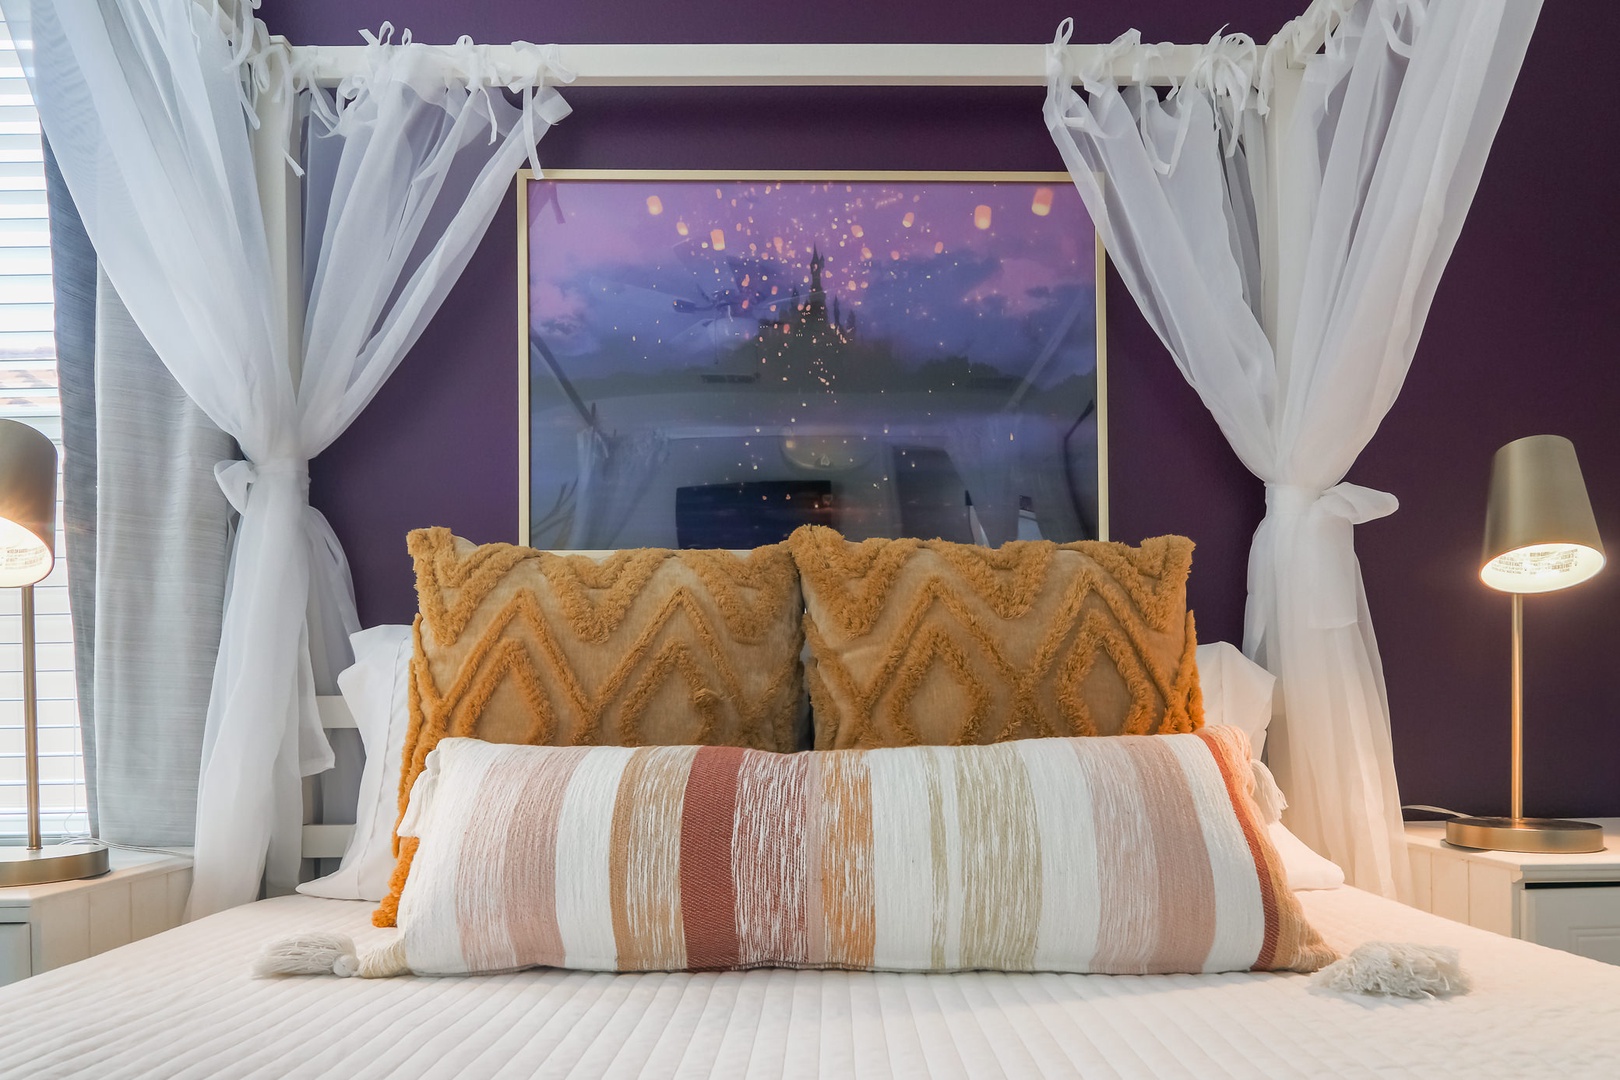 Bedroom 3 Tangled themed with Queen bed, Smart TV, and private en-suite (2nd floor)